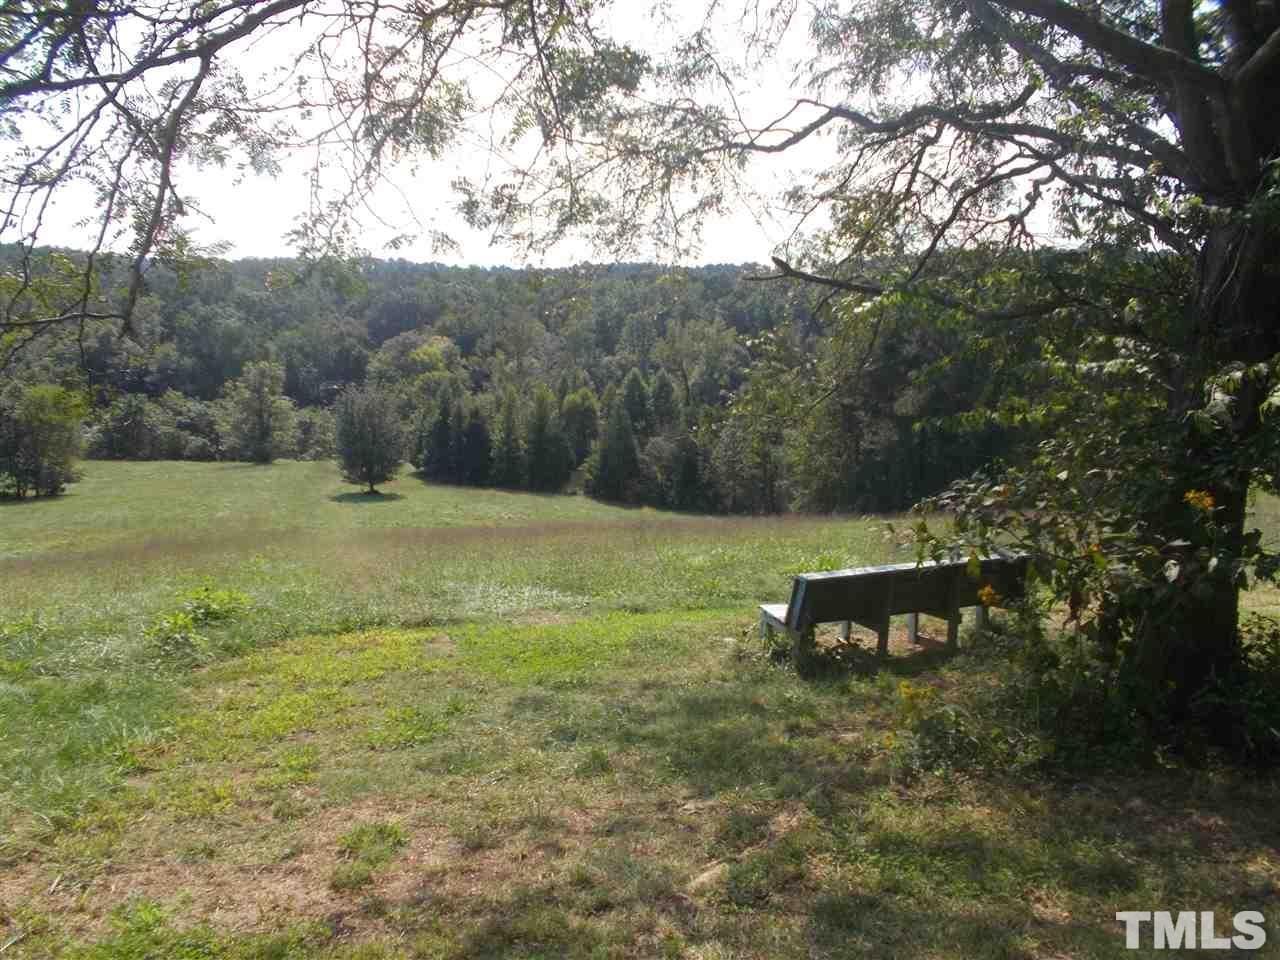 a view of a bench in a field